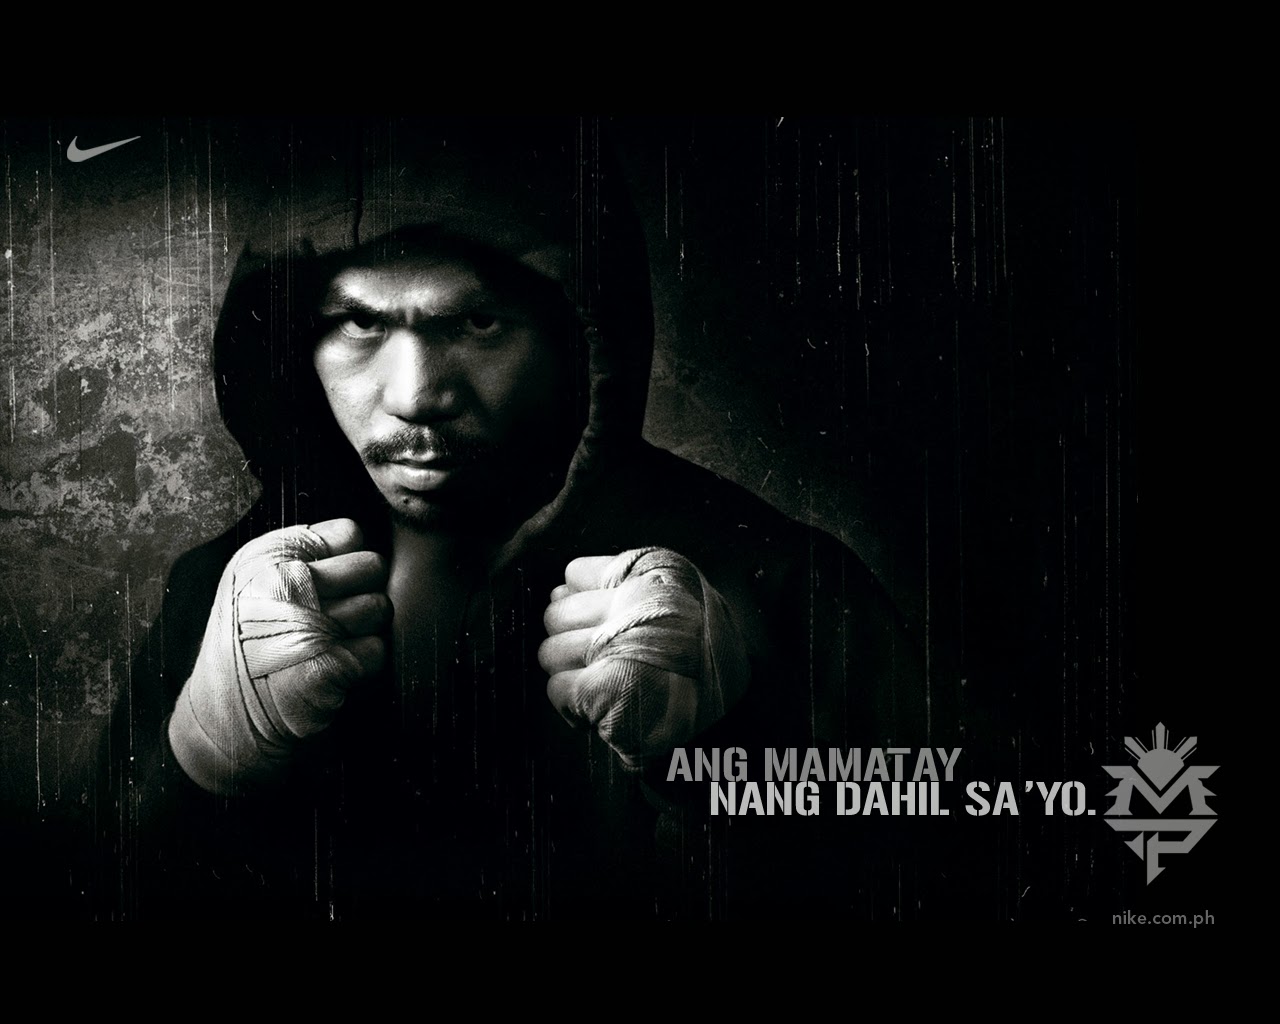 ALL SPORTS PLAYERS: Manny Pacquiao hd Wallpapers 2013